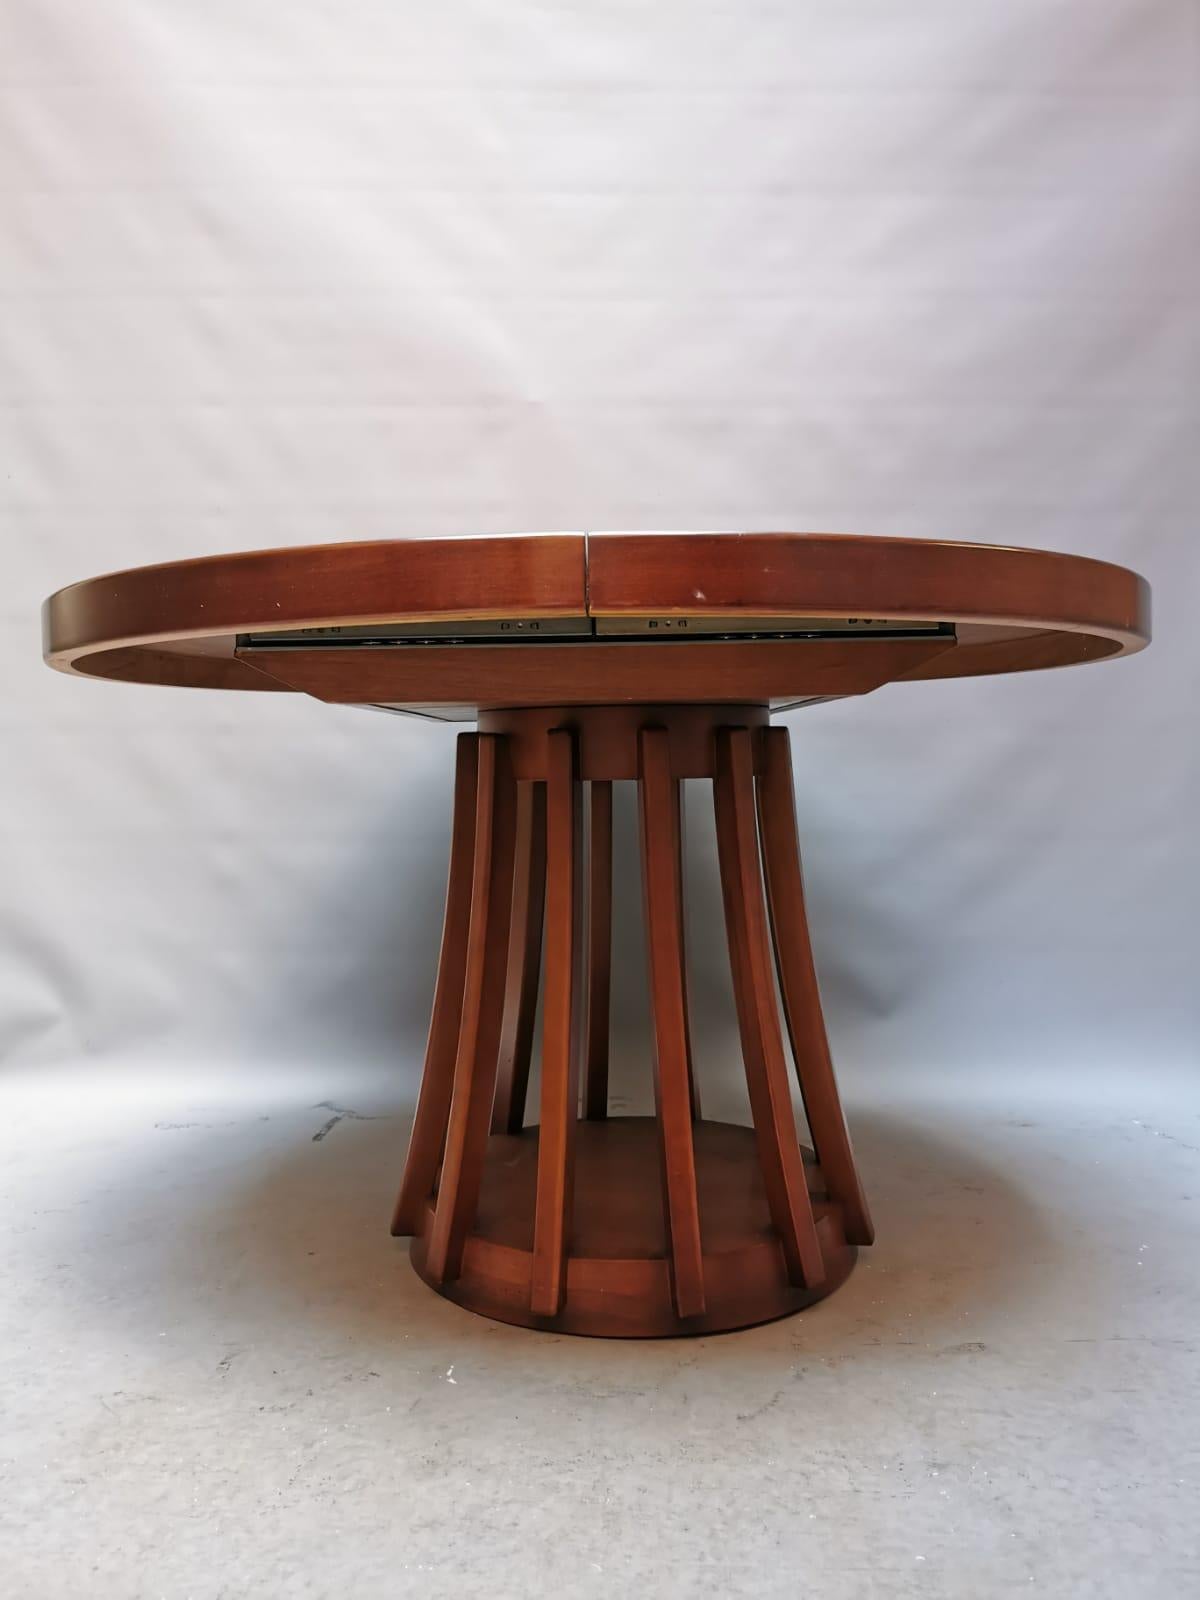 This table is an incredible example of Italian historical design, made by great expertise. This item is in great condition, no restoration have been made.